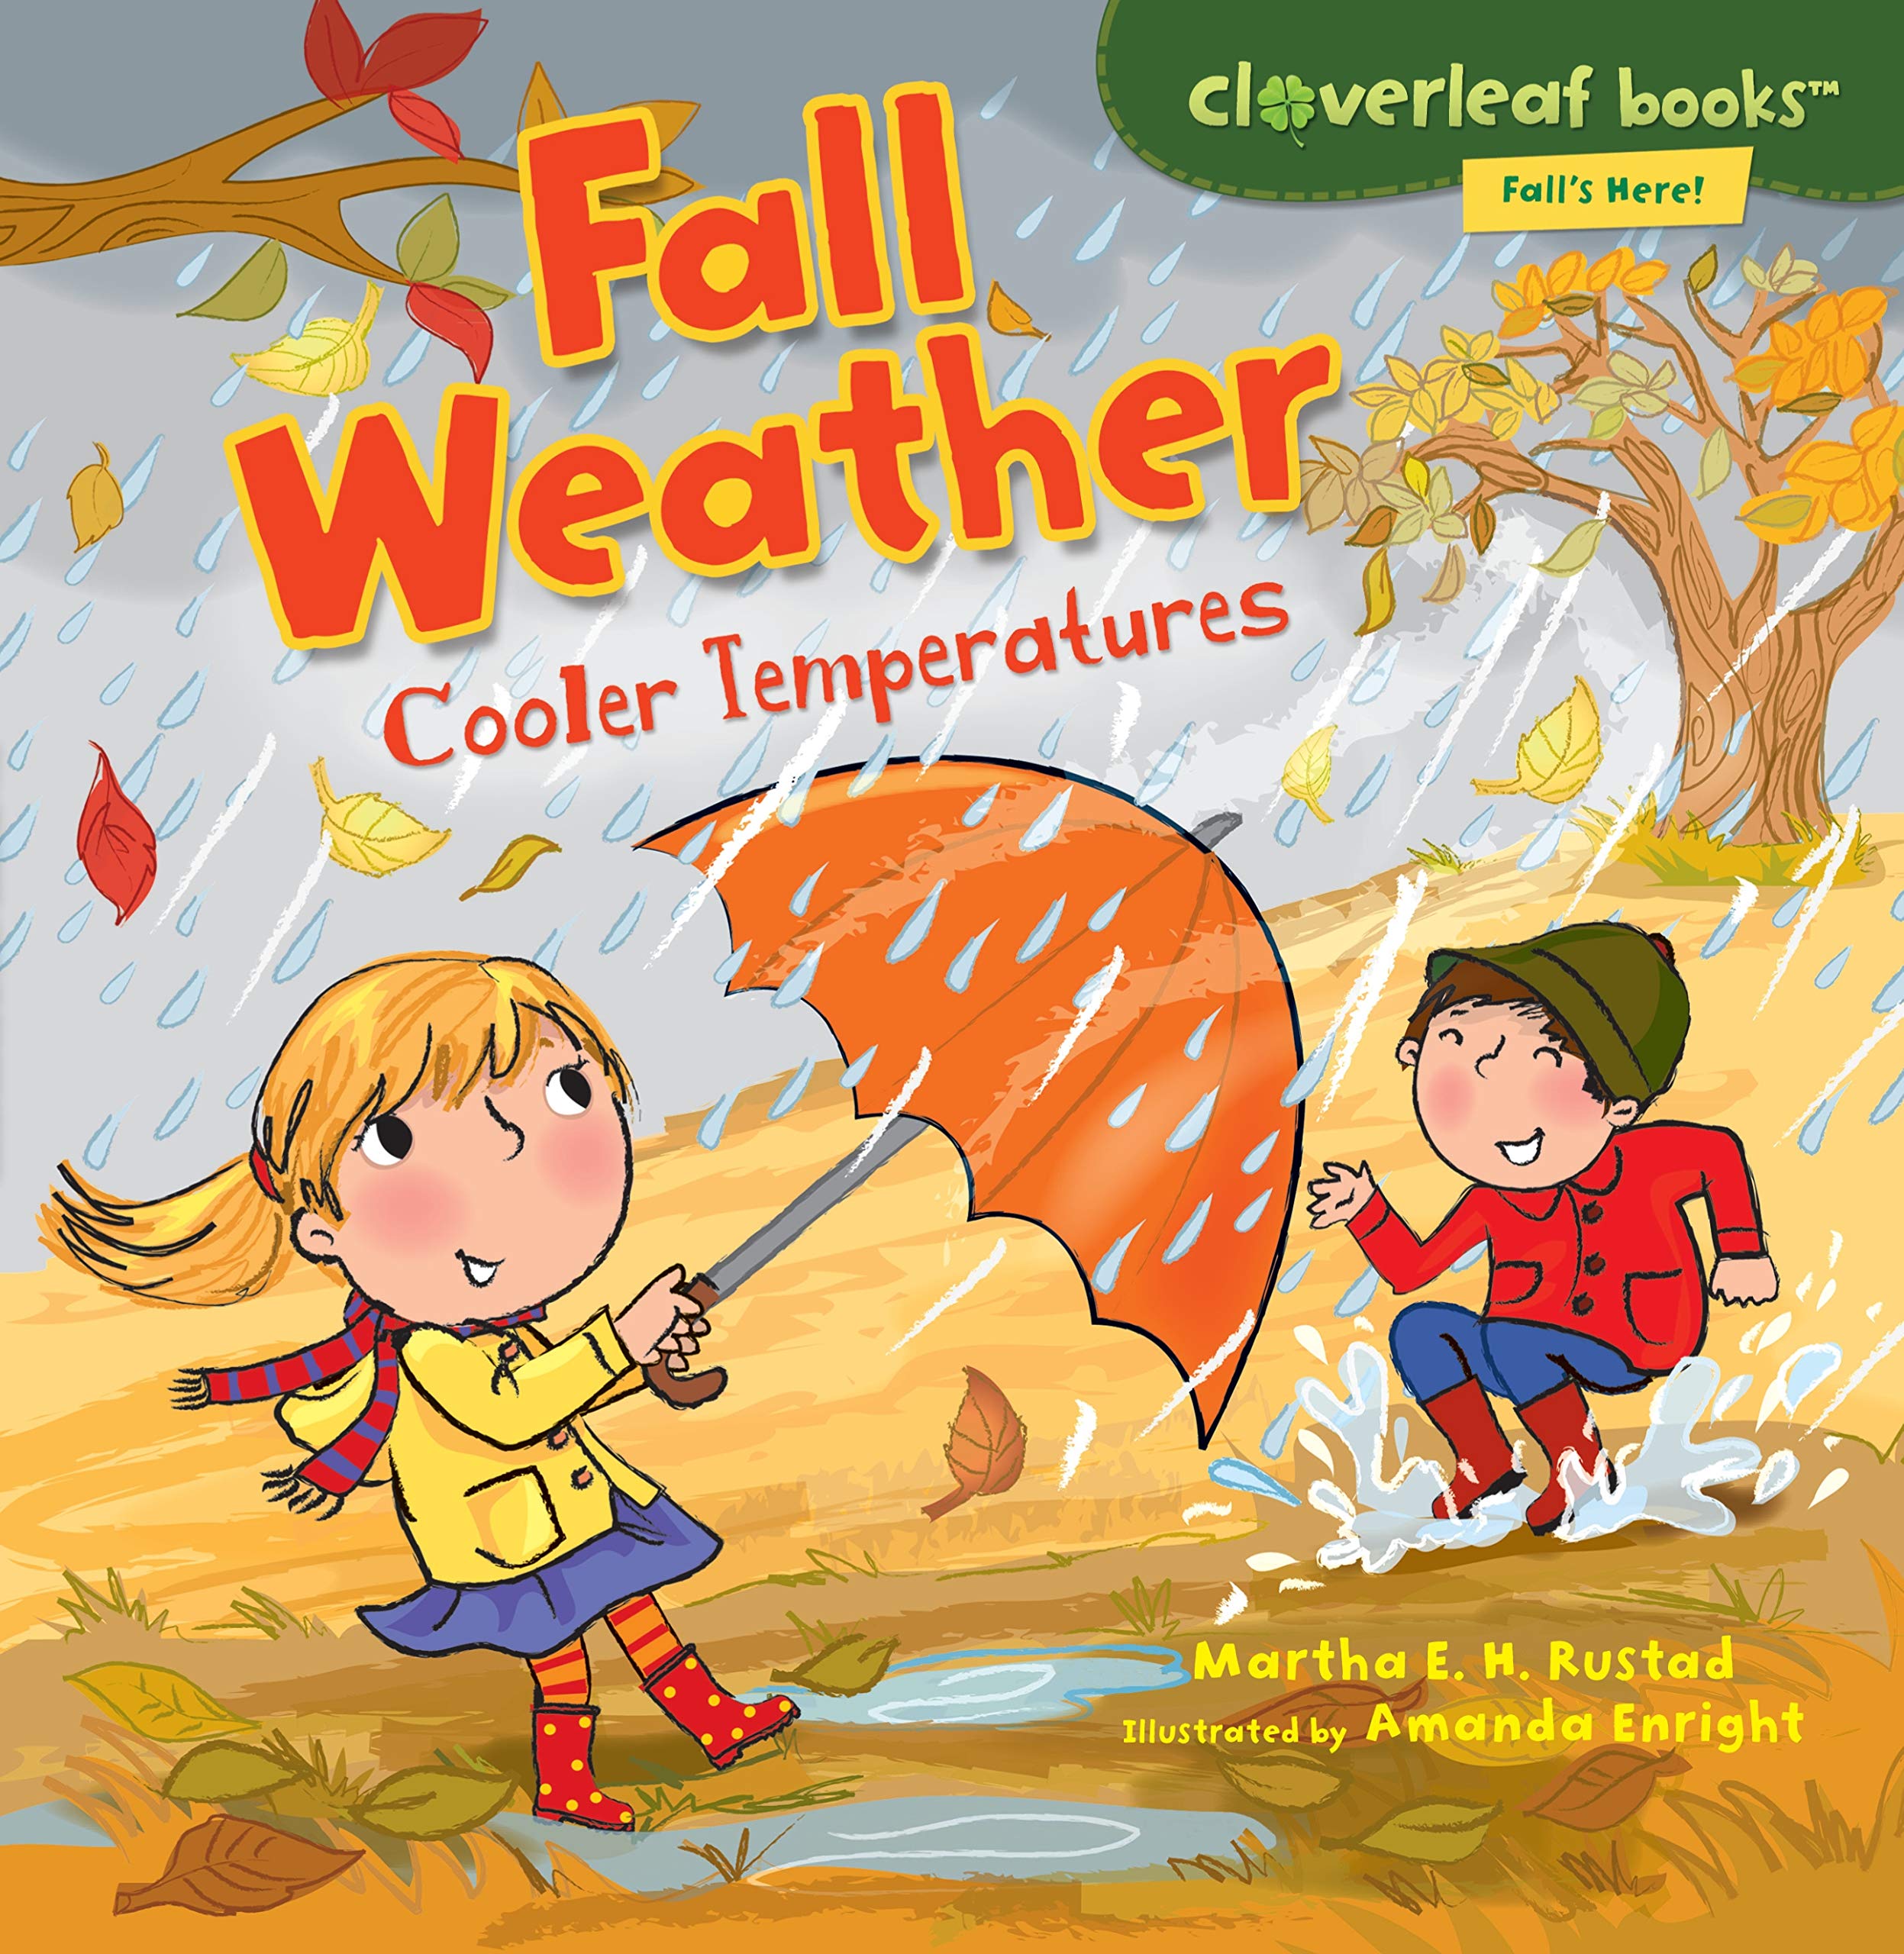 speech and language teaching concepts for Fall Weather: Cooler Temperatures in speech therapy​ ​